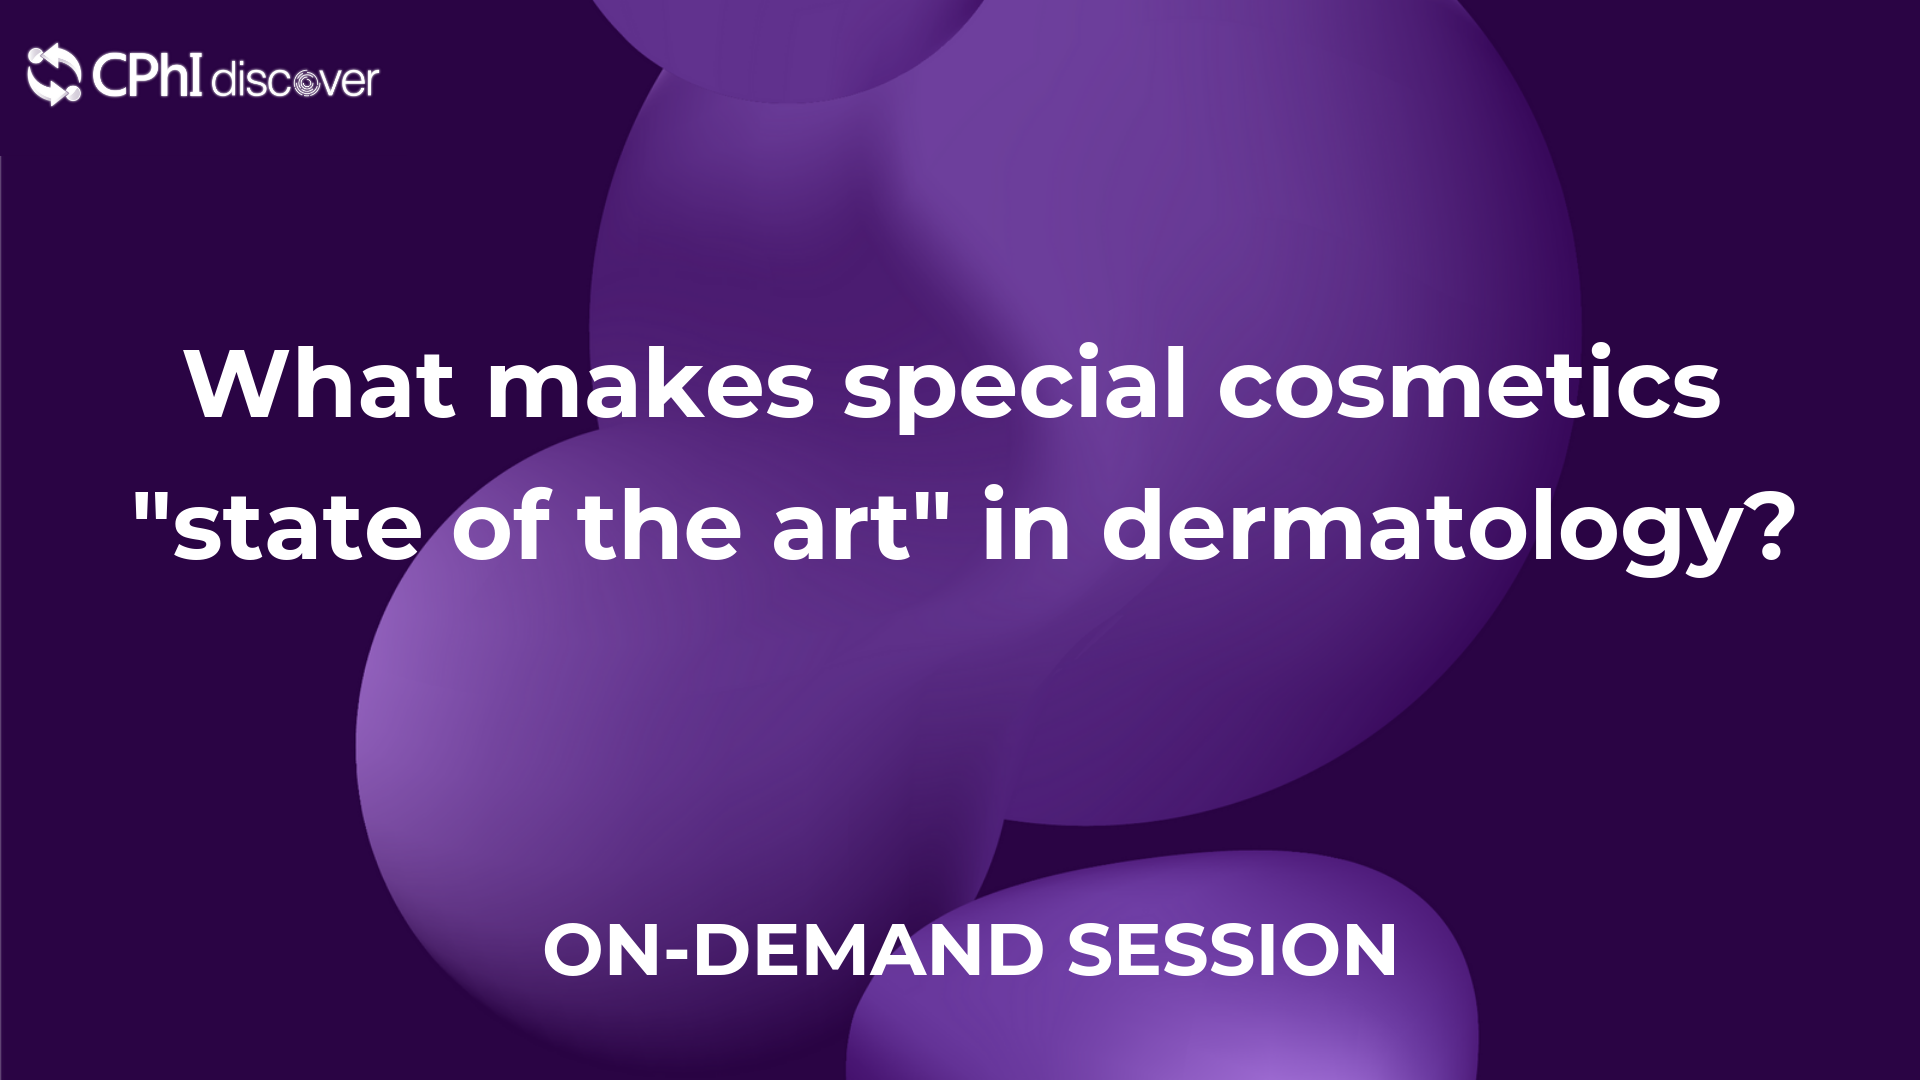 What makes special cosmetics 'state of the art‘ in dermatology?